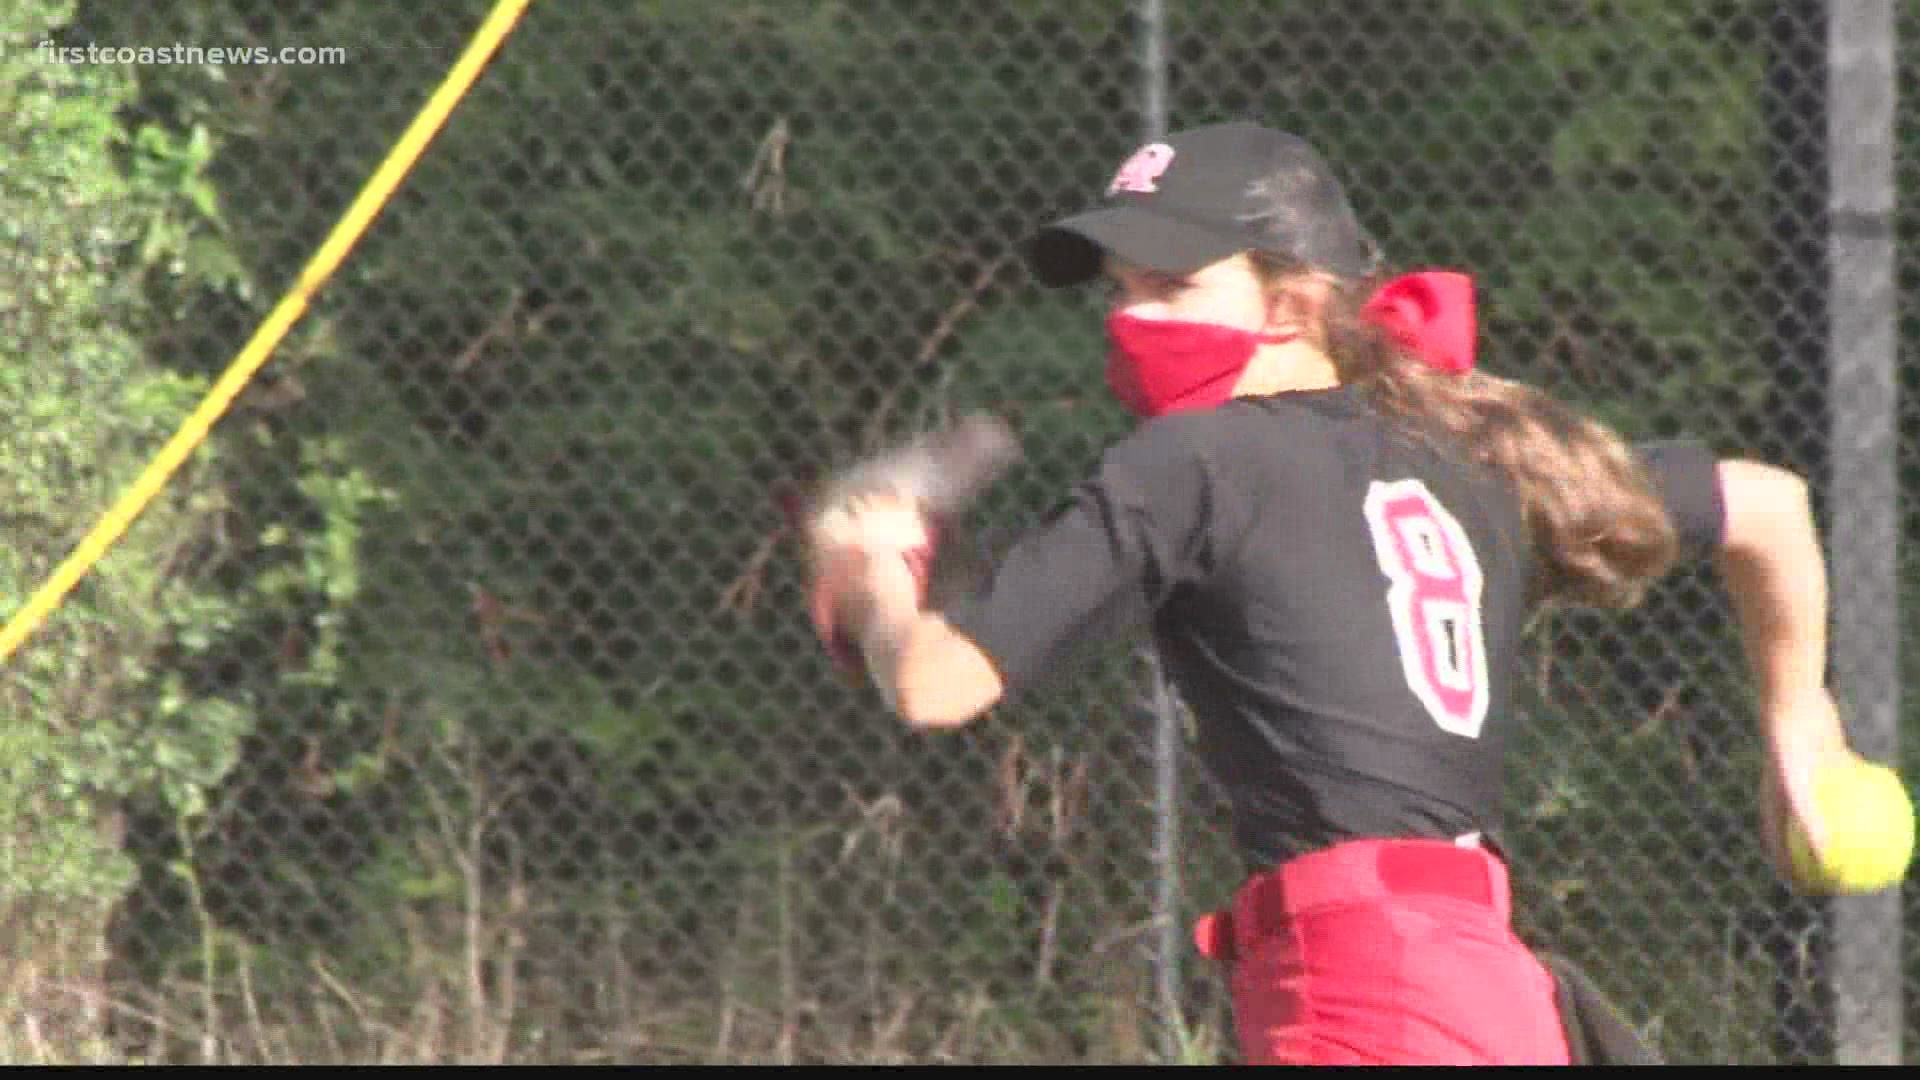 While high school football was slightly delayed, high school softball started on-time in Georgia. And so far, so good -- especially at Glynn Academy.